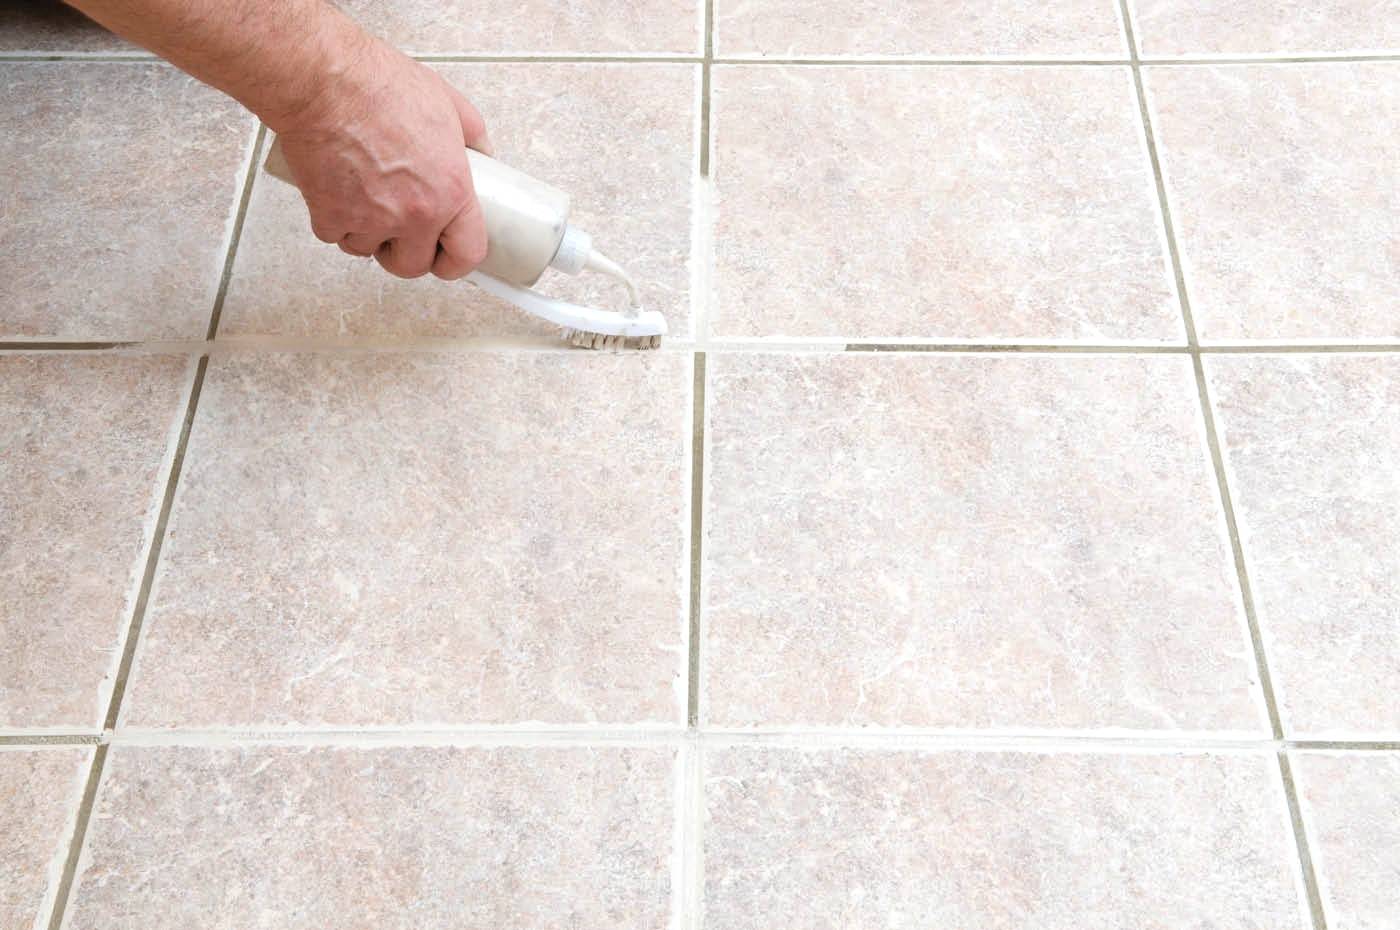 Grout Colorant Market Analysis and Forecast: A Comprehensive Study on Market Size, Share, Growth Drivers, Trends, and Opportunities during the Forecast Period